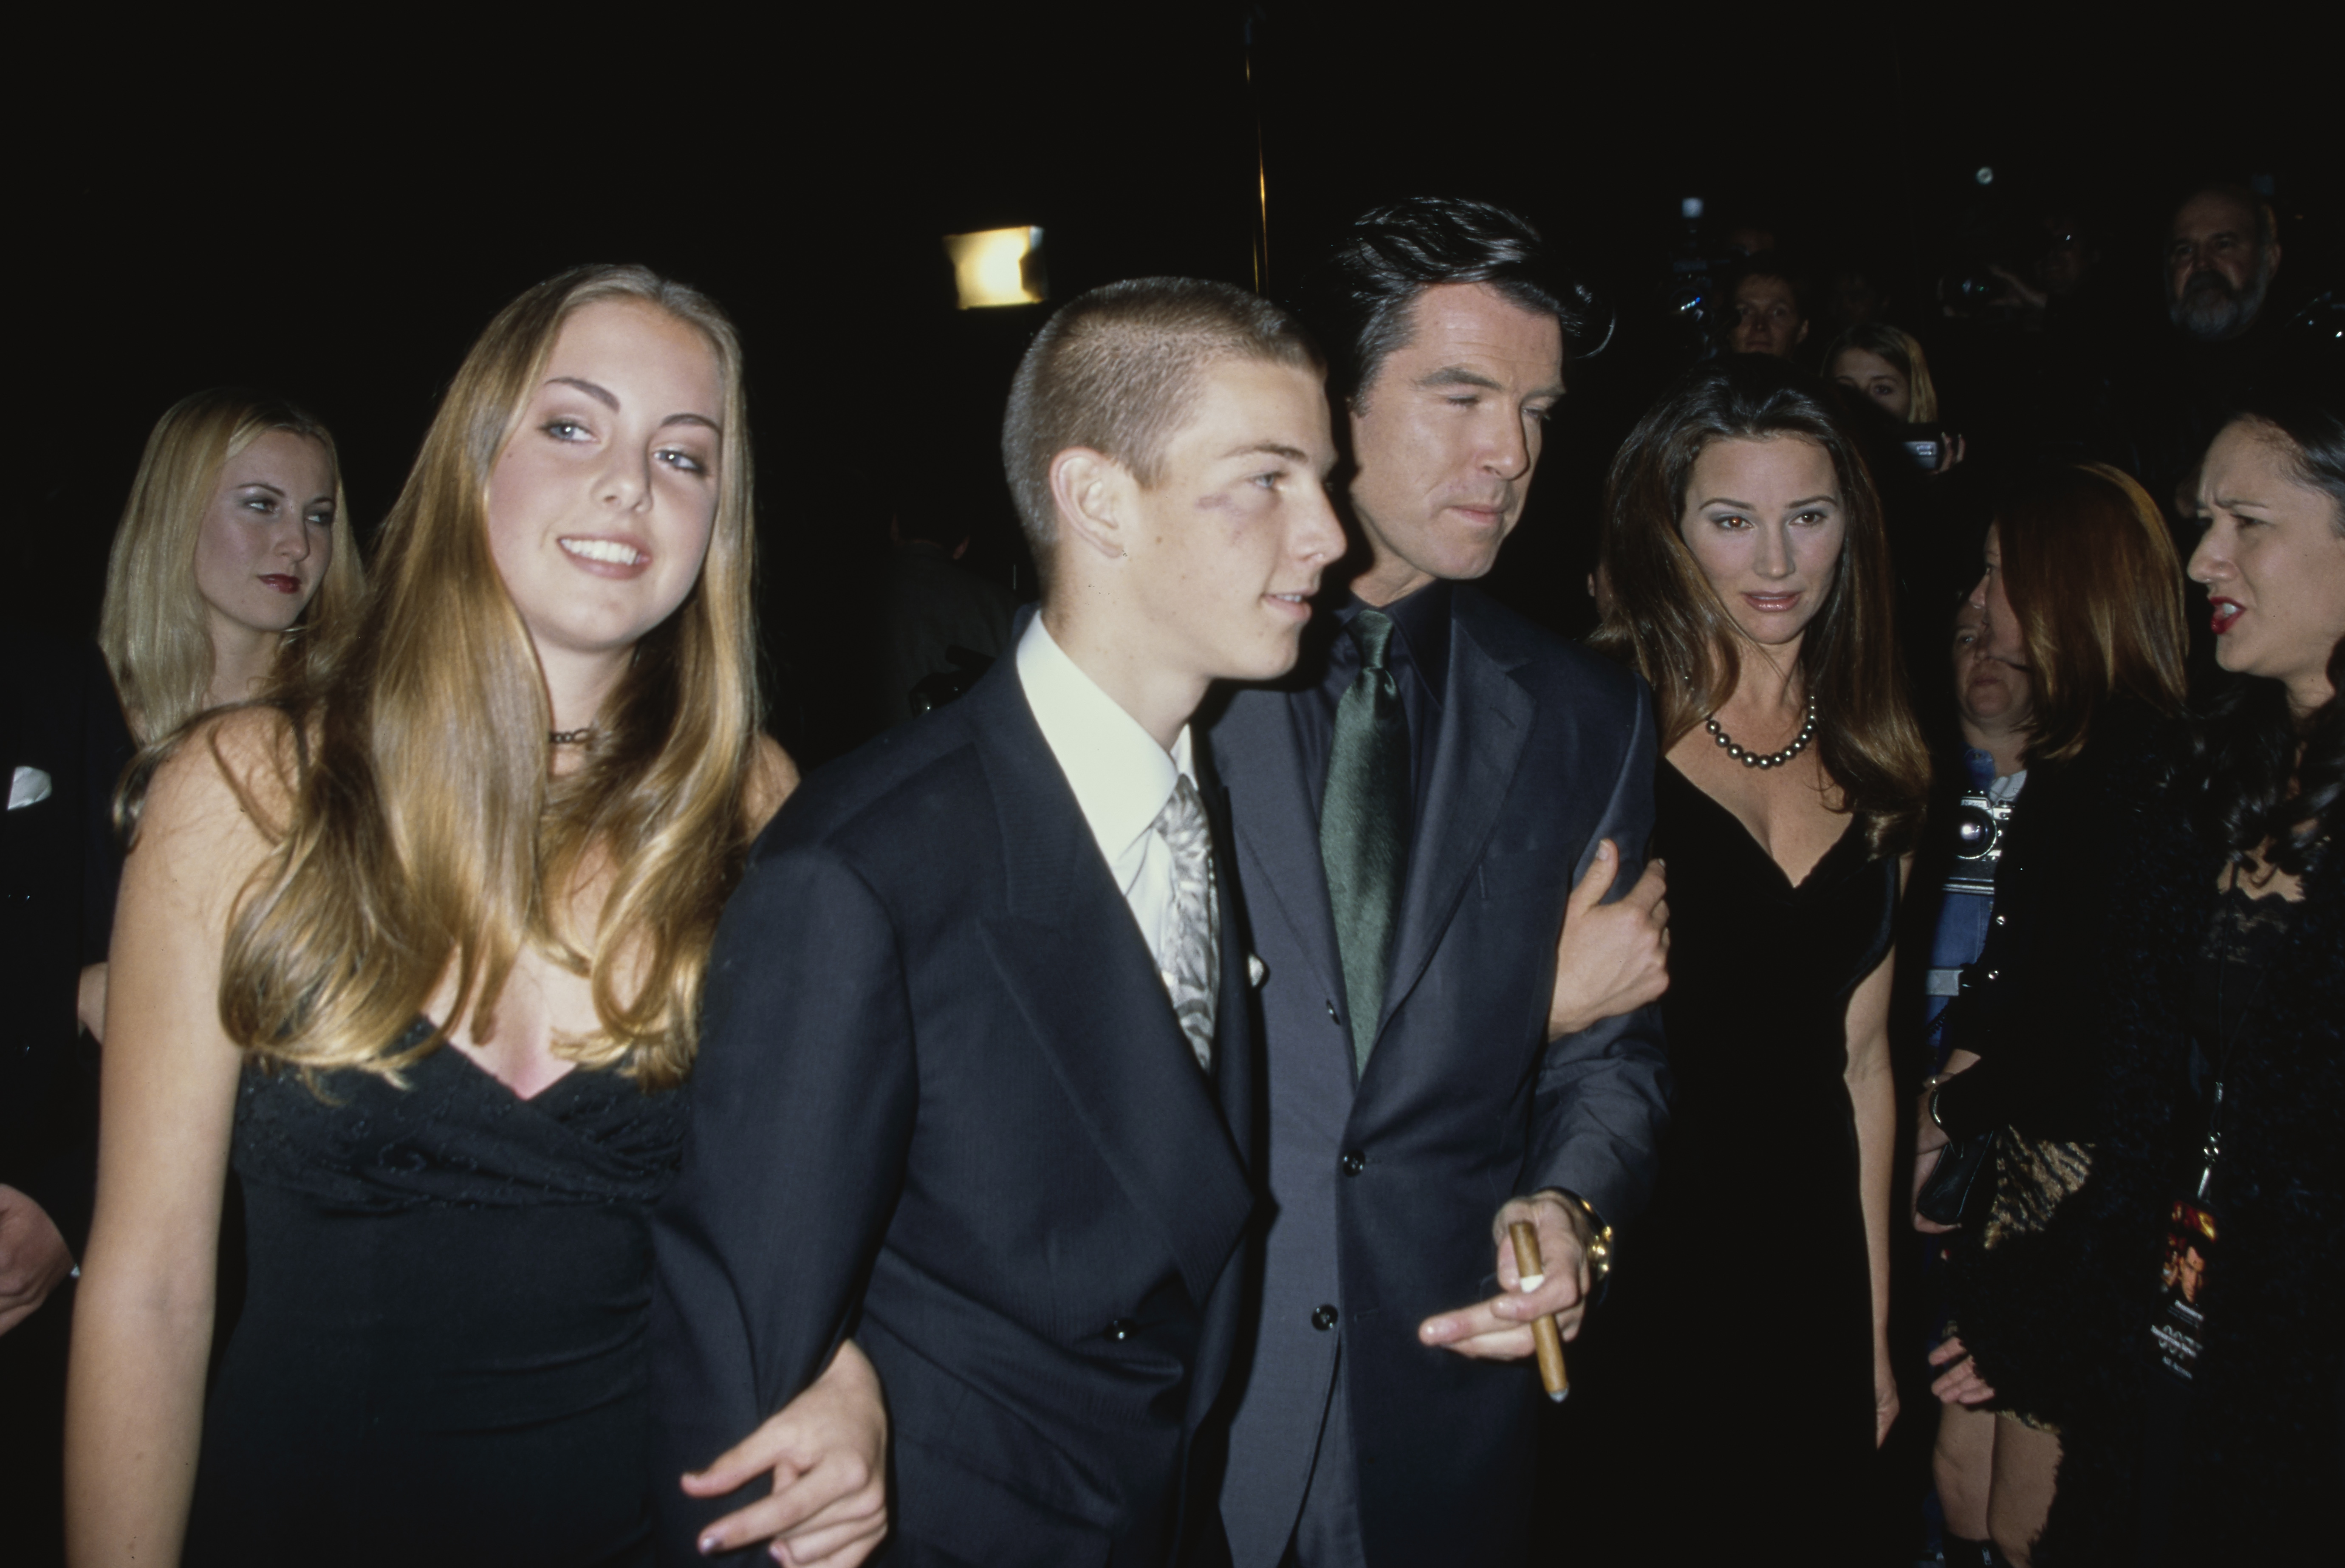 Charlotte, Sean, and Pierce Brosnan and Keely Shaye Smith at the "Tomorrow Never Dies" premiere in Los Angeles, 1997. | Source: Getty Images